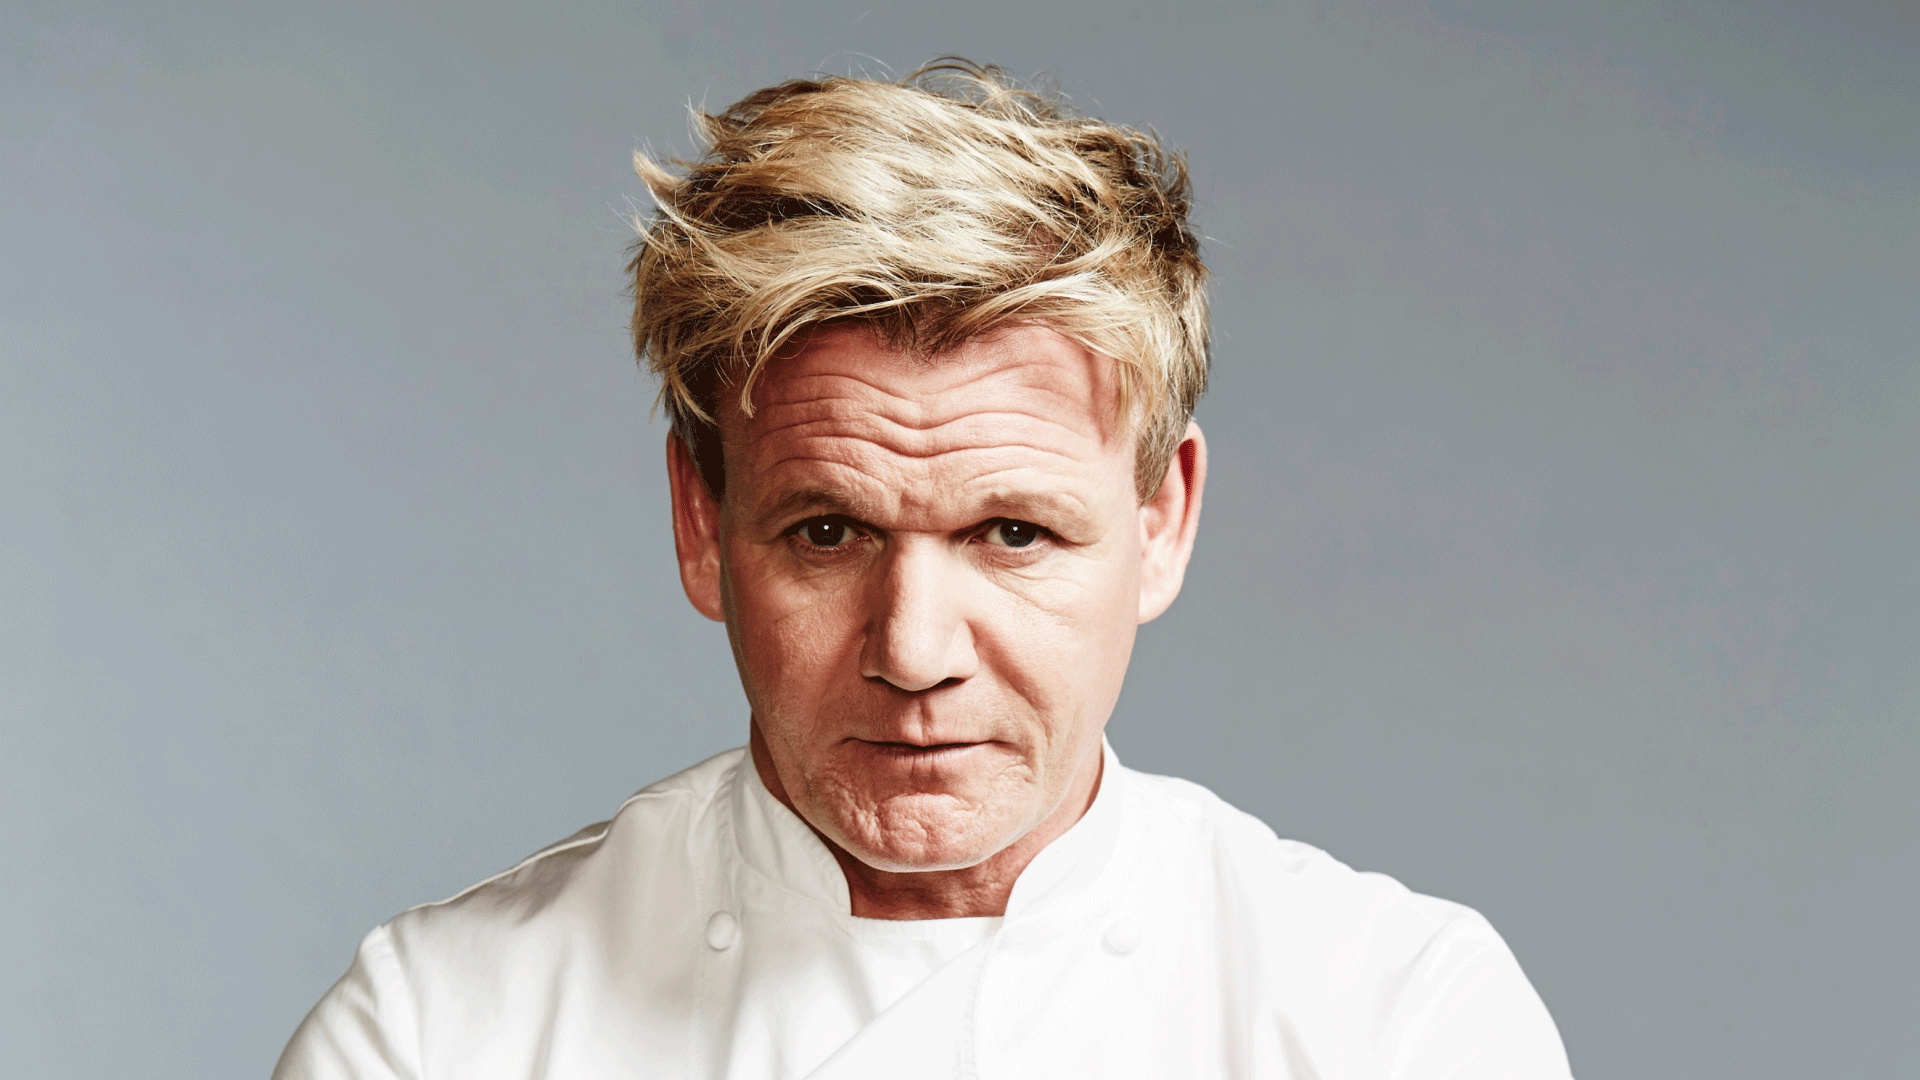 Gordon Ramsay: Launched the award-winning British series Kitchen Nightmares in 2004. 1920x1080 Full HD Background.